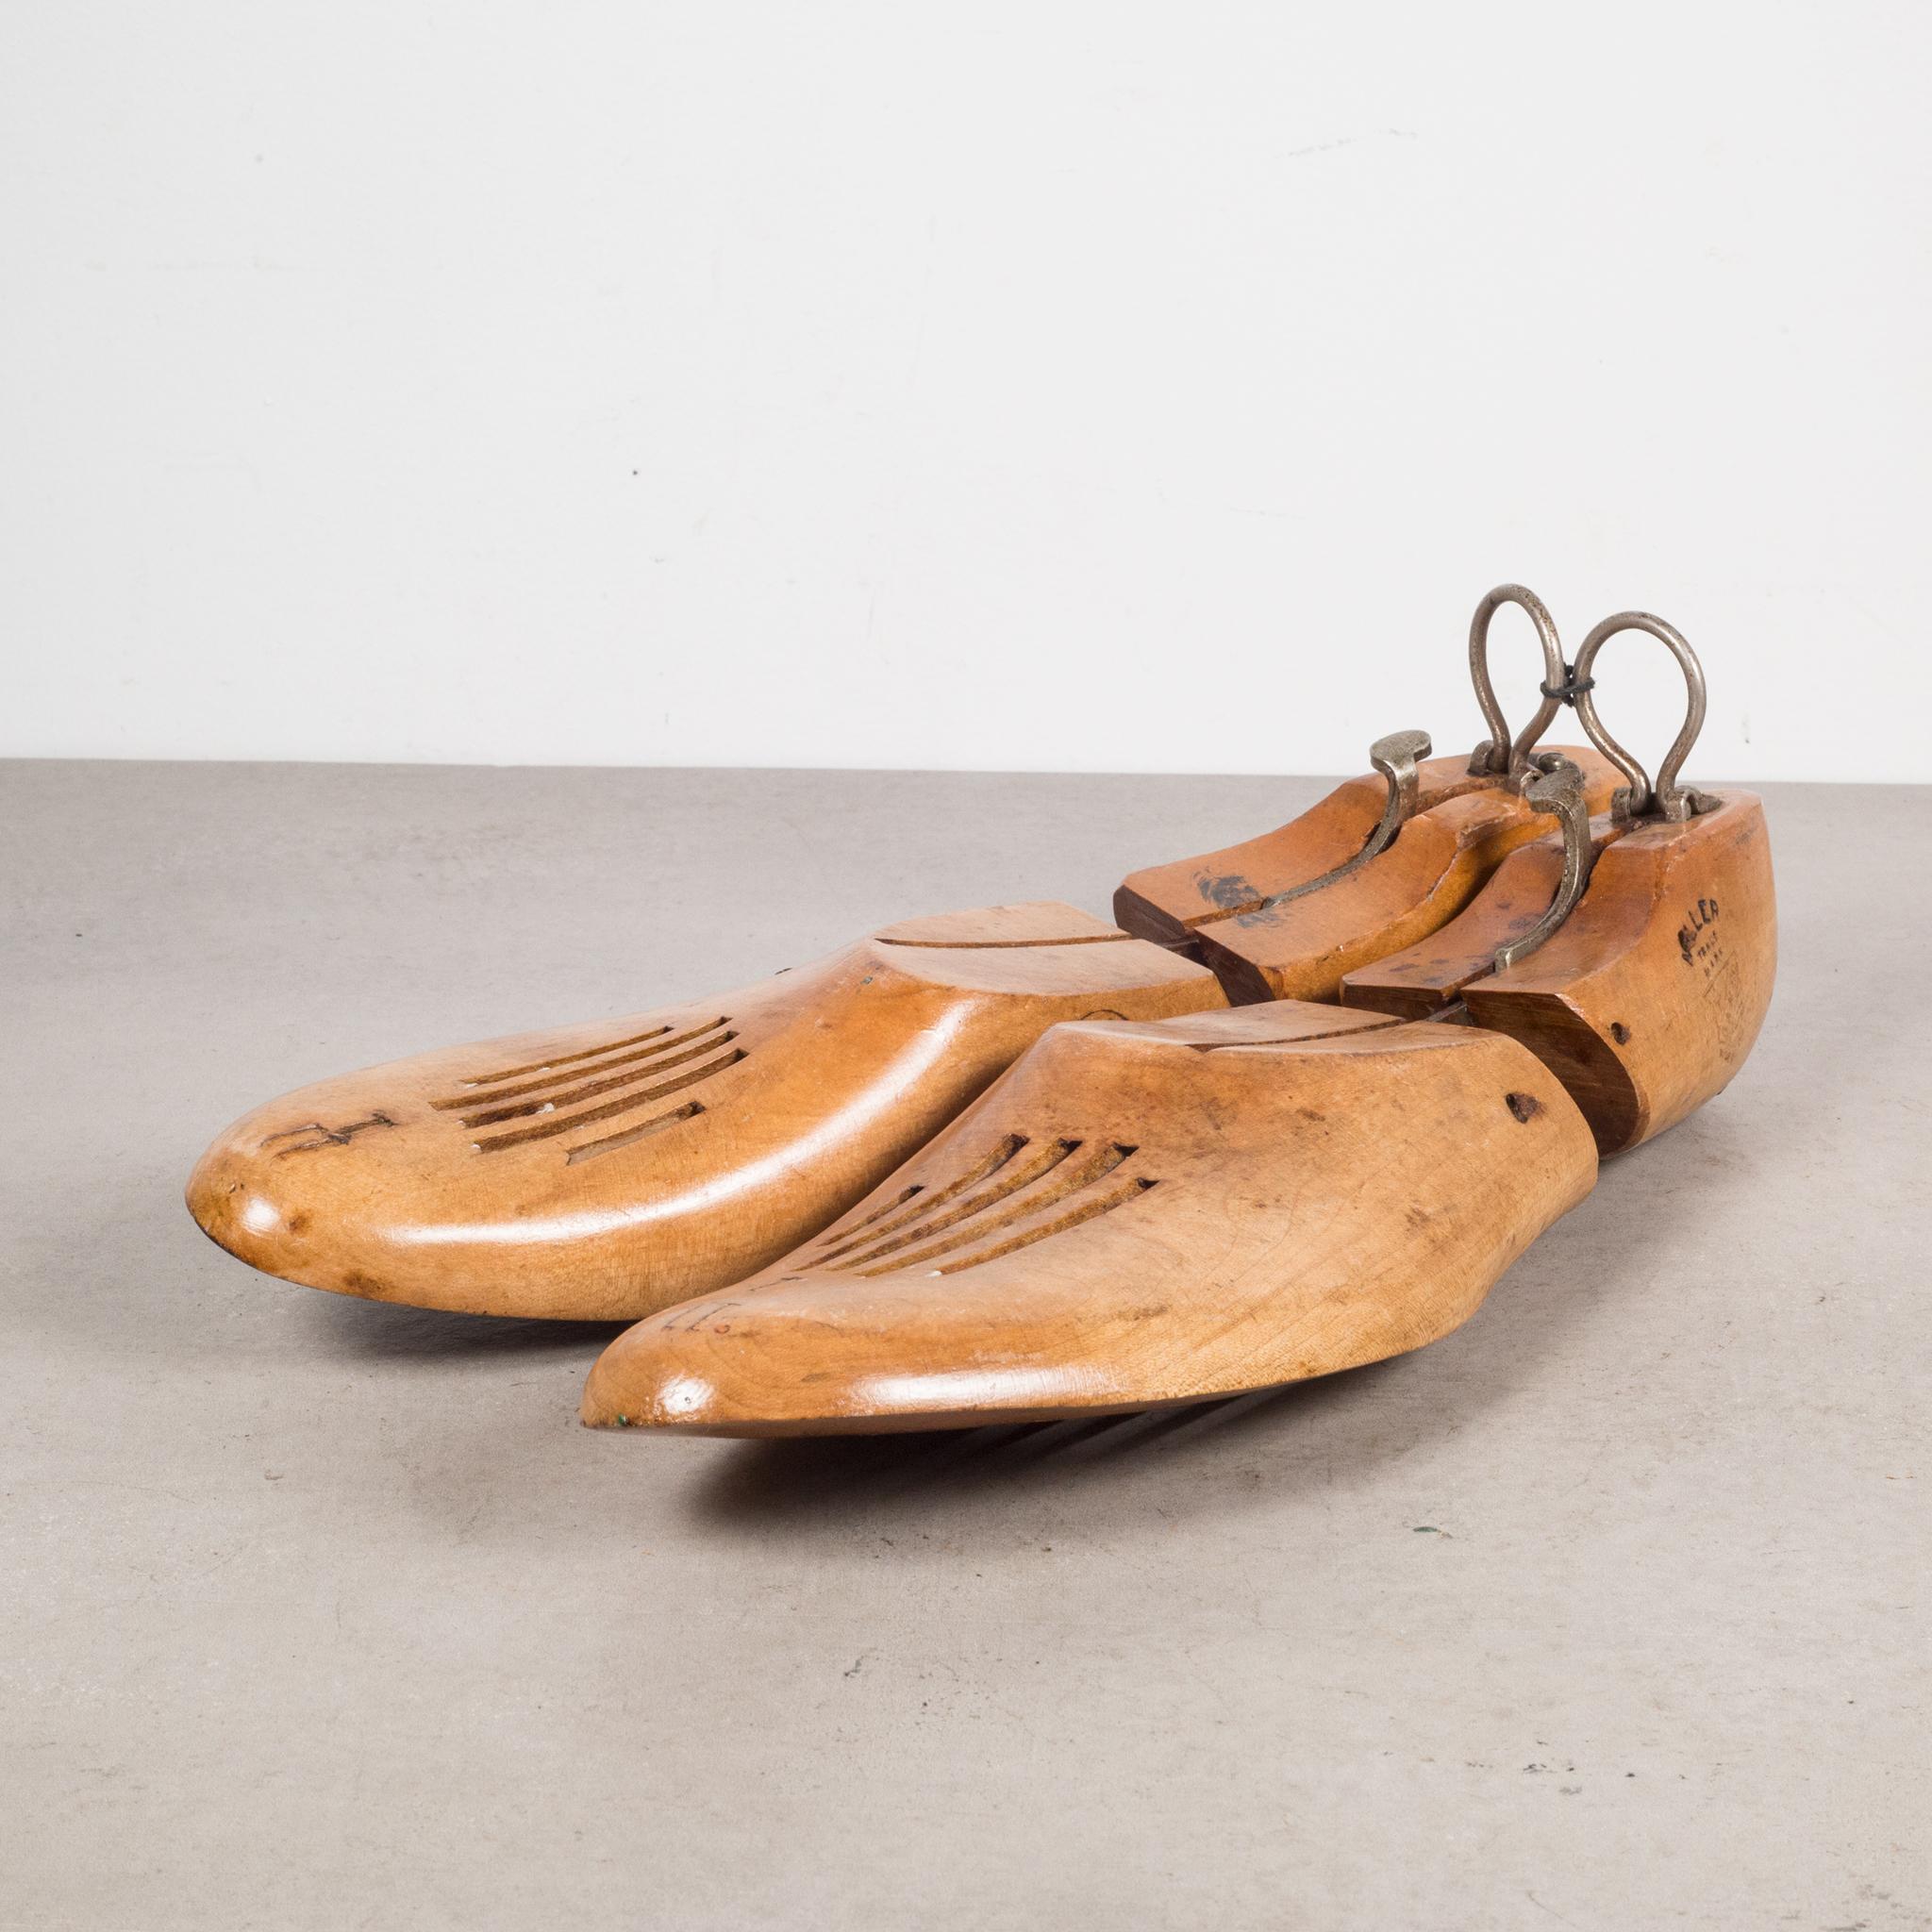 Original pairs of cobbler's wooden shoe forms. They have retained their original finish and have the appropriate wear.
Creator unknown.
Date of manufacture c.1920
Materials and techniques maple or beech.
Condition good. Wear consistent with age